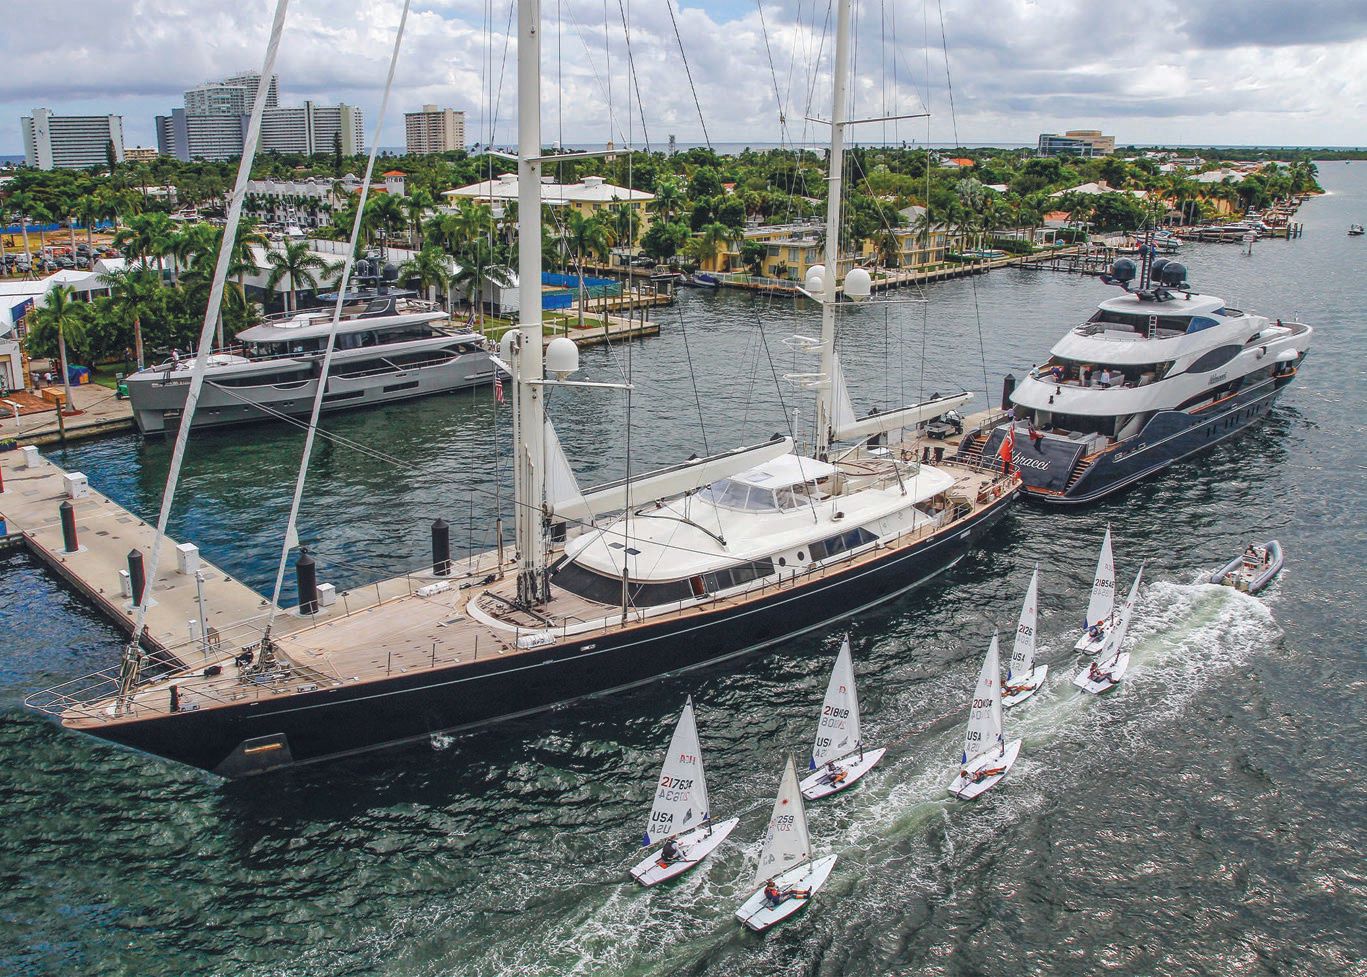 Each year, the world’s greatest and most impressive yachts and superyachts flock to Fort Lauderdale International Boat Show for an all-encompassing, five-day experience.